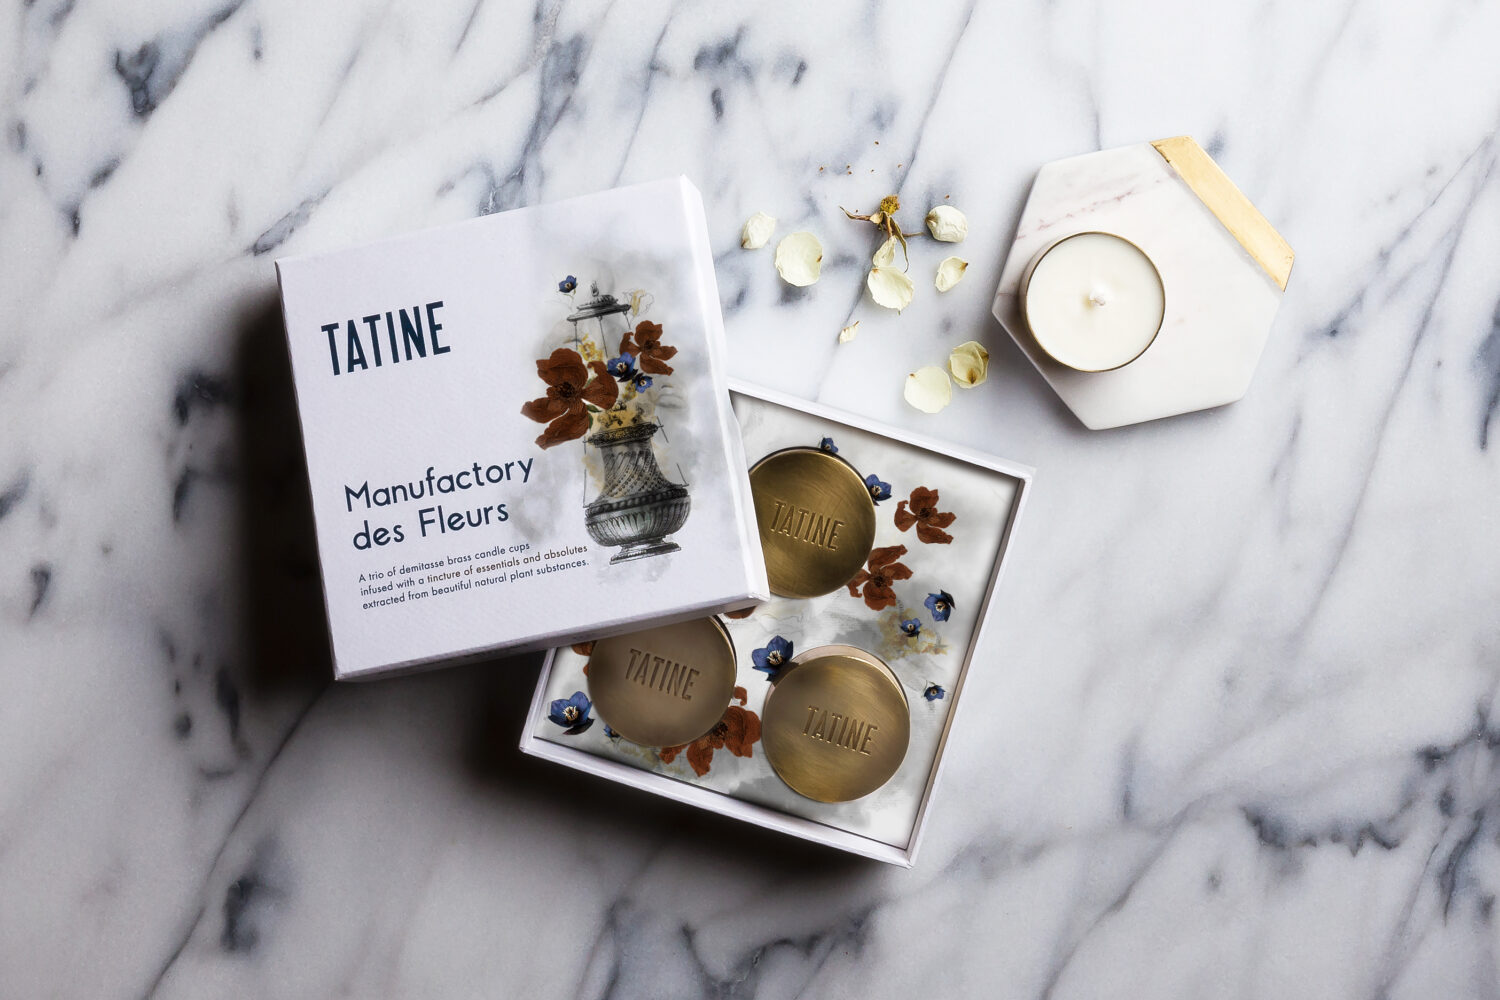 Tatine Manufactory Candle Trio Set - Packaging designs by rebecca snyder of A LA MODE designs, an award-winning graphic & web design studio seeing canton, akron, cleveland & columbus, Ohio